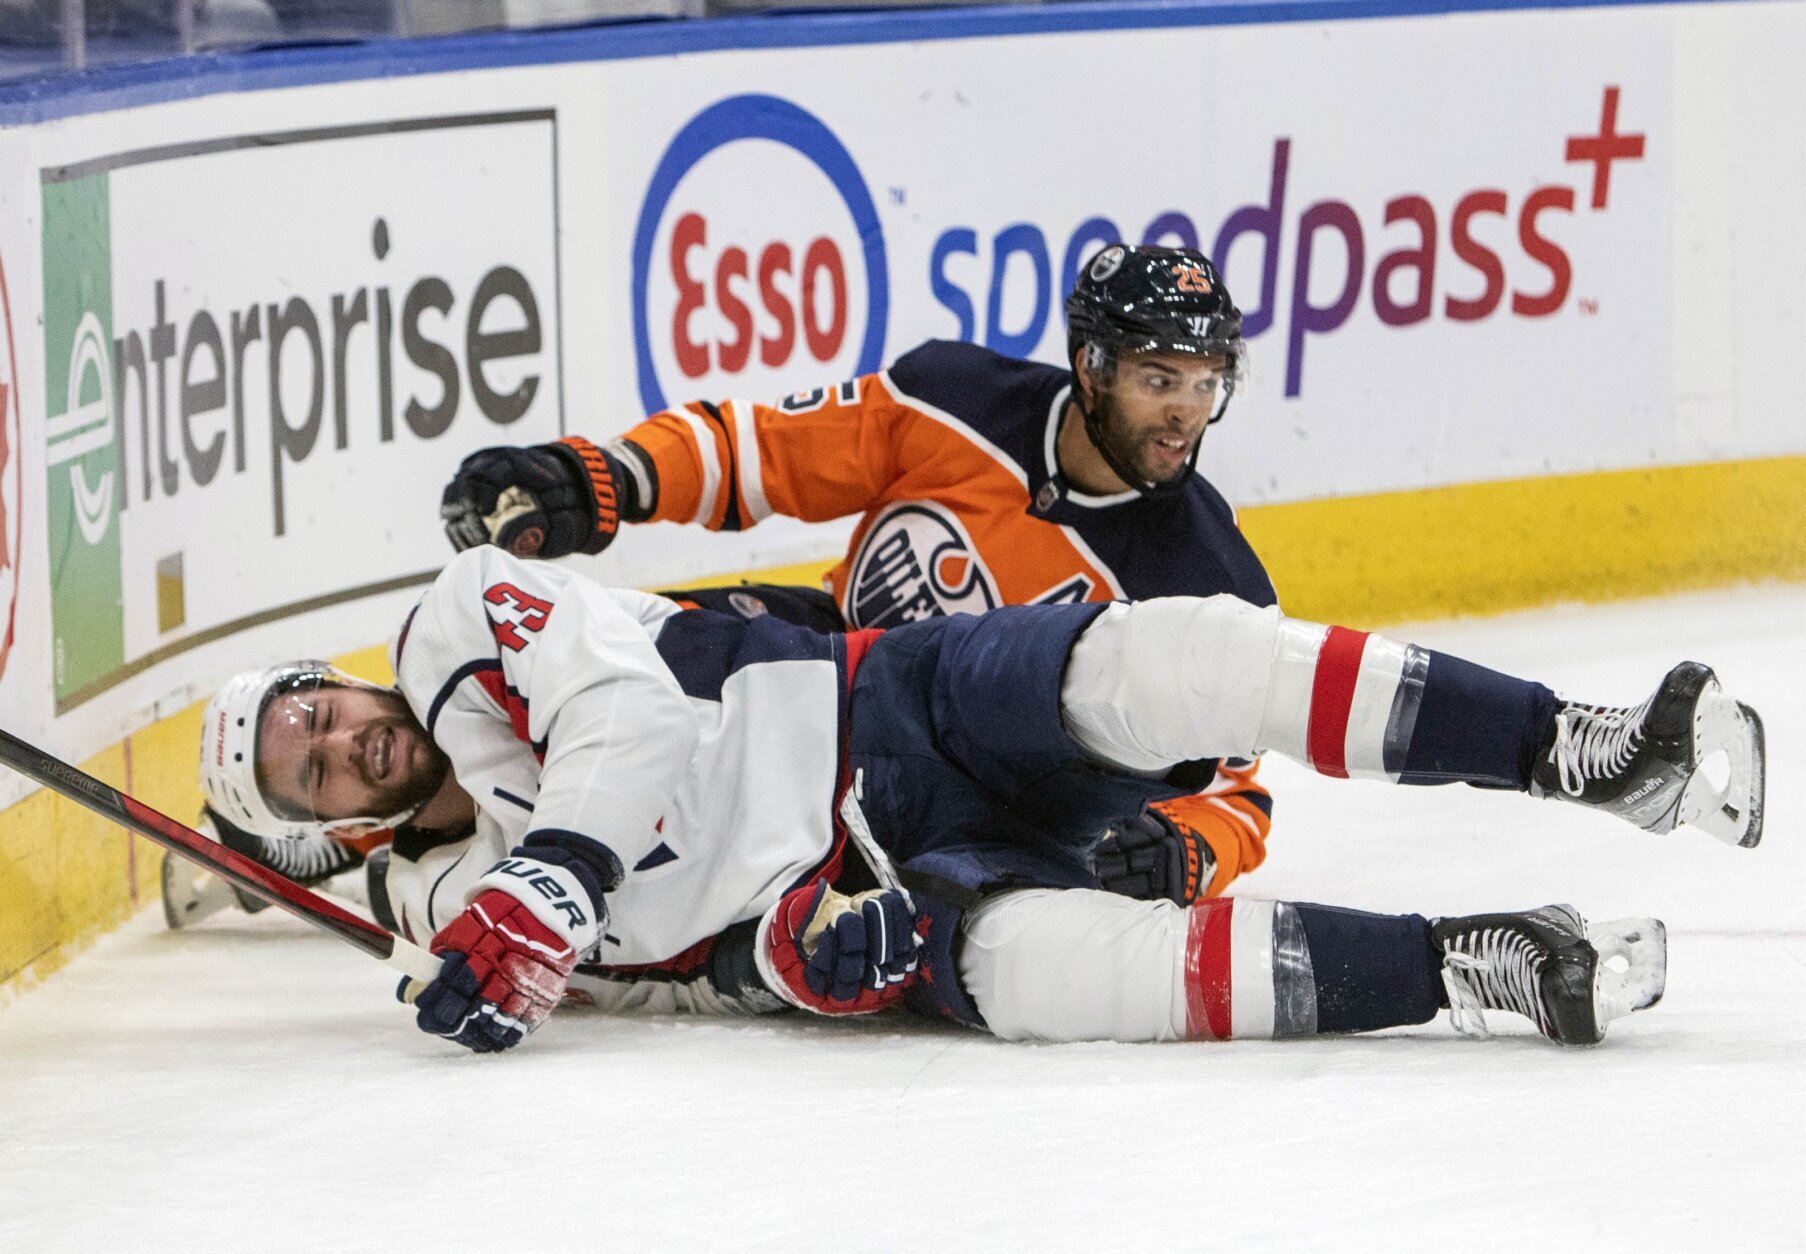 McDavid scores in OT, Oilers beat Capitals to snap skid